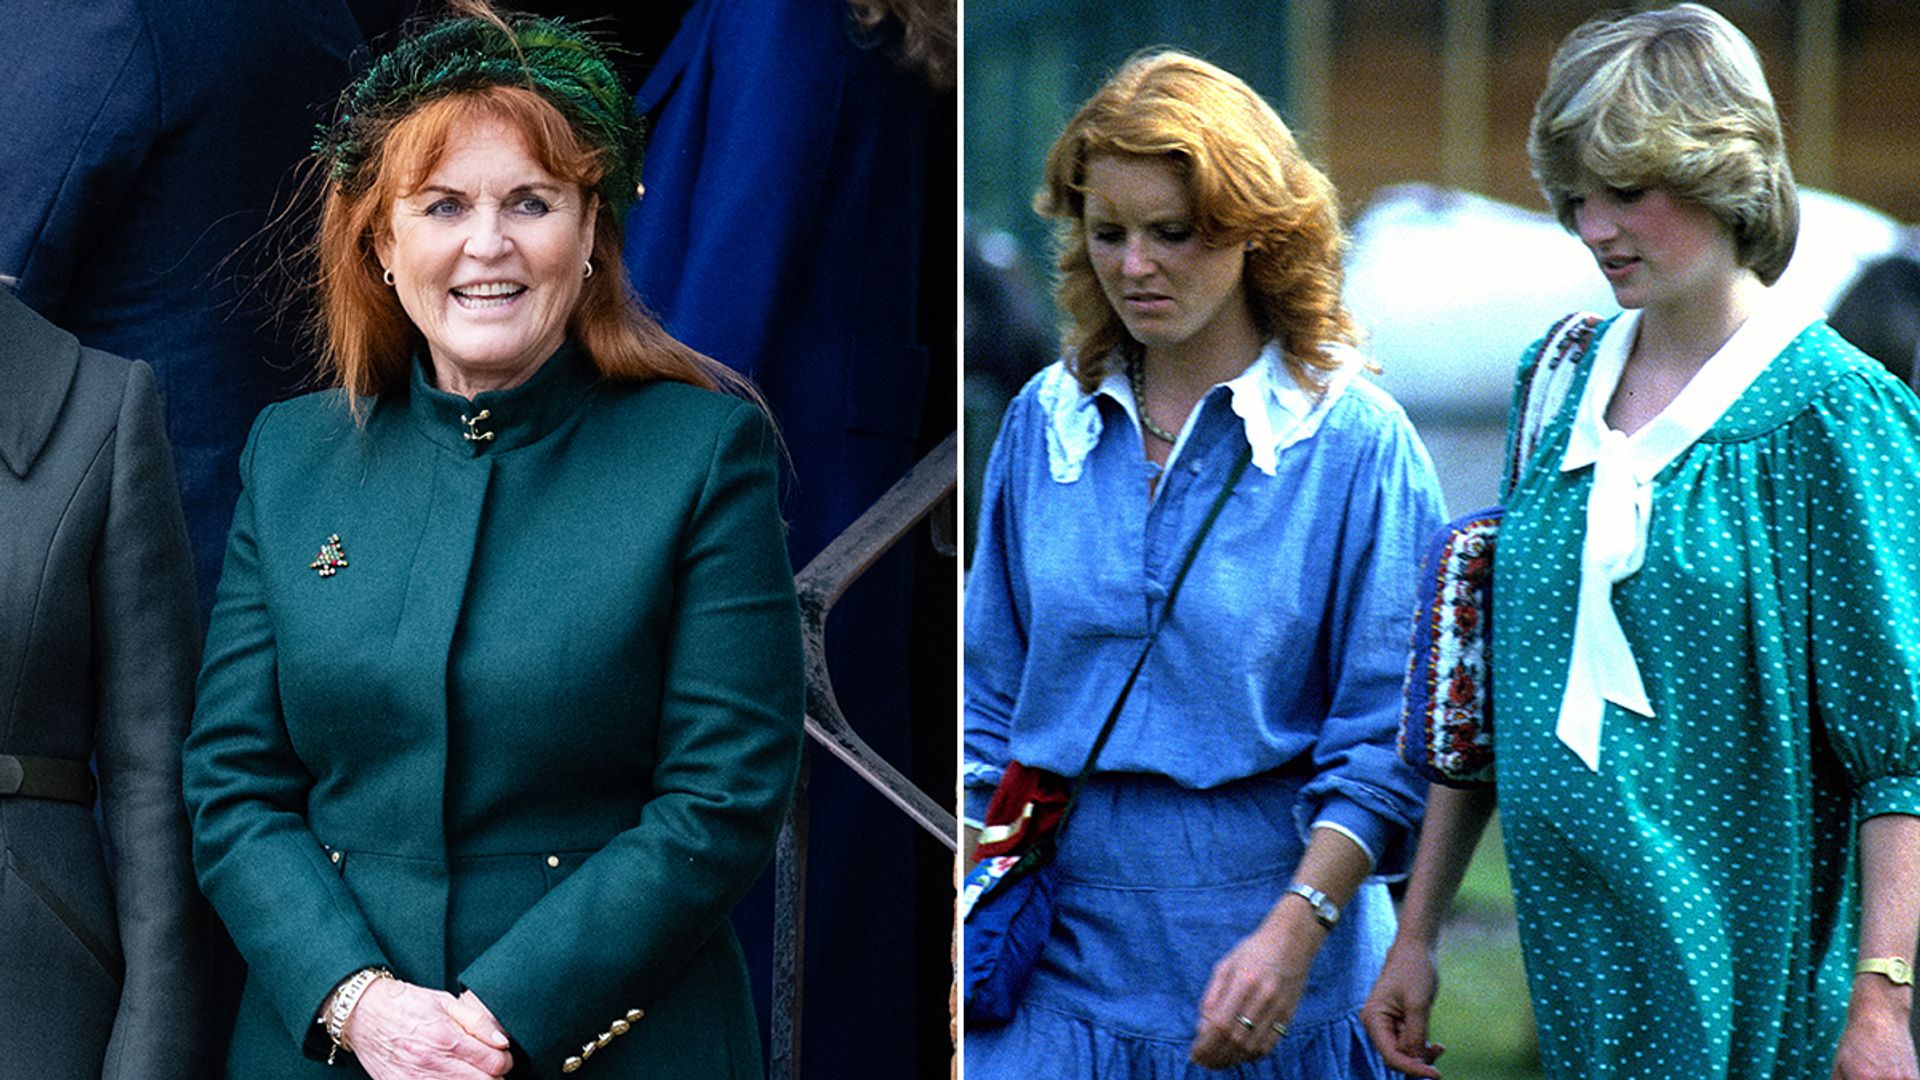 Split image of Sarah Ferguson in a green overcoat and Sarah Ferguson in blue outfit walking with a pregnant Princess Diana